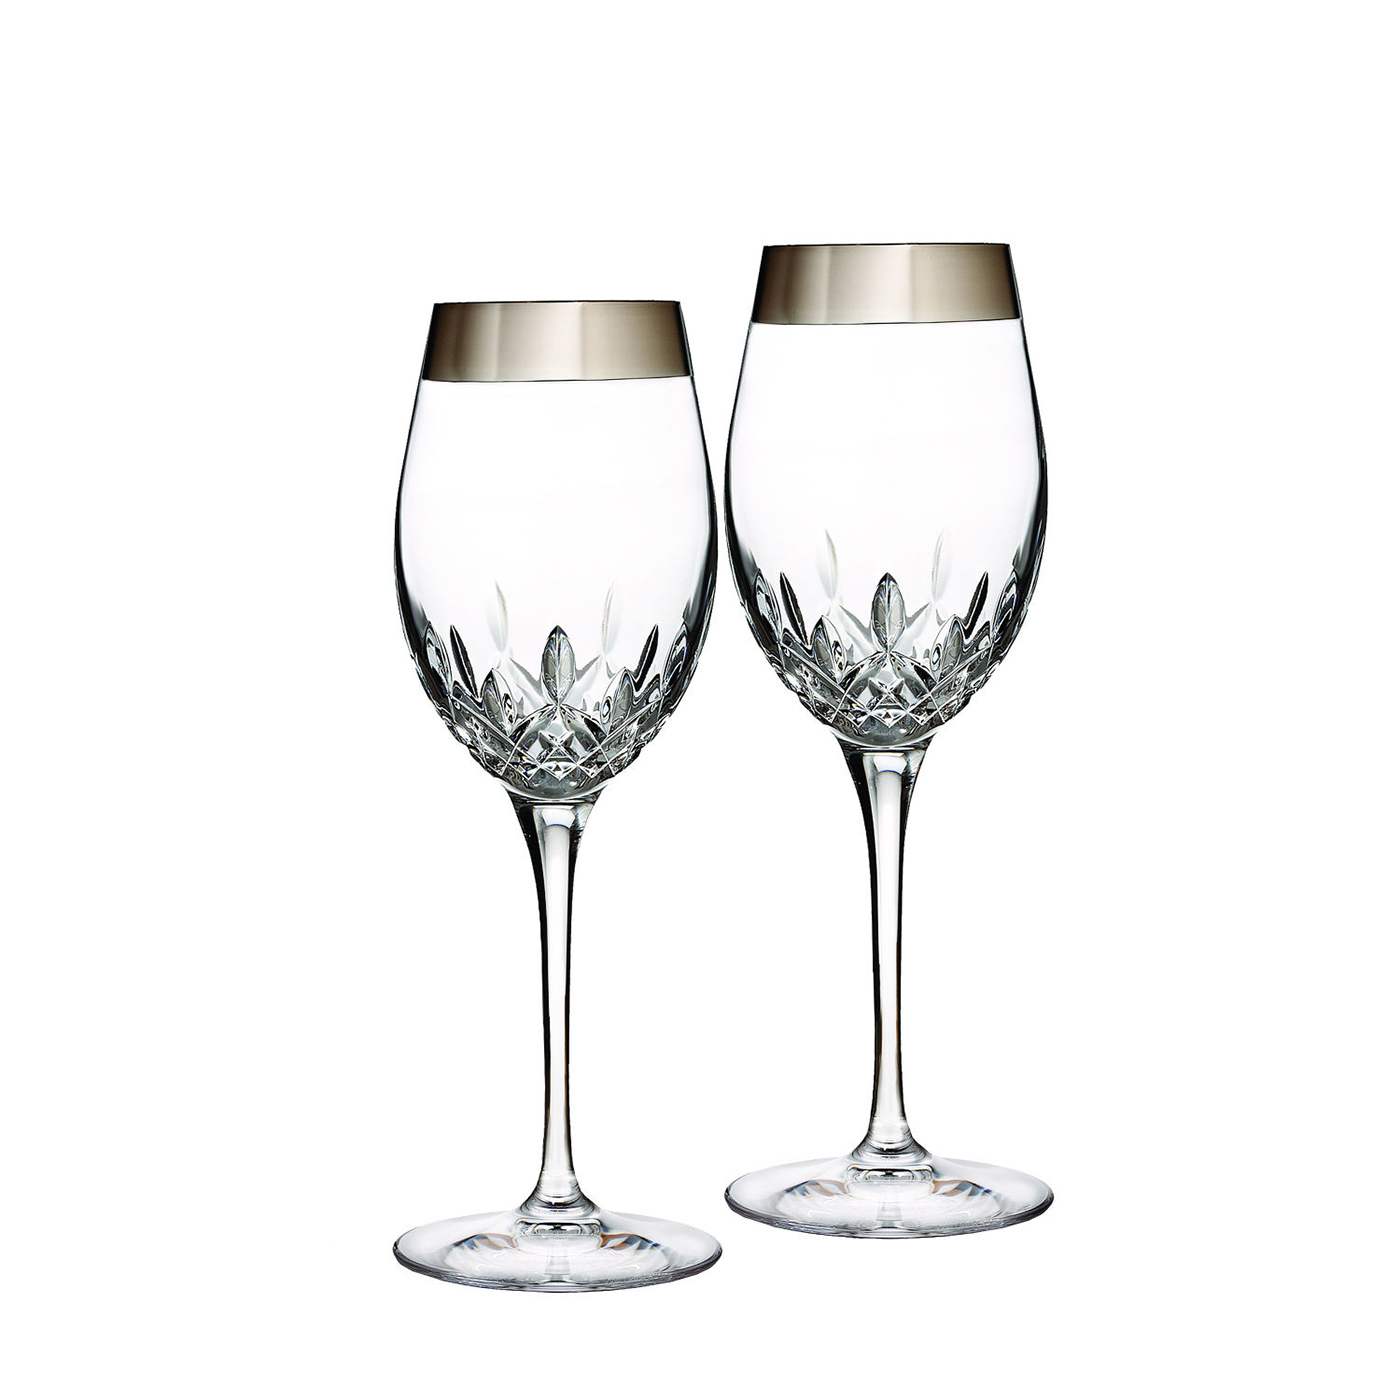 https://cdn11.bigcommerce.com/s-6zwhmb4rdr/images/stencil/original/products/118543/254548/lismore-essence-platinum-wide-band-white-wine-glass-pair-by-waterford-11__16486.1652232134.jpg